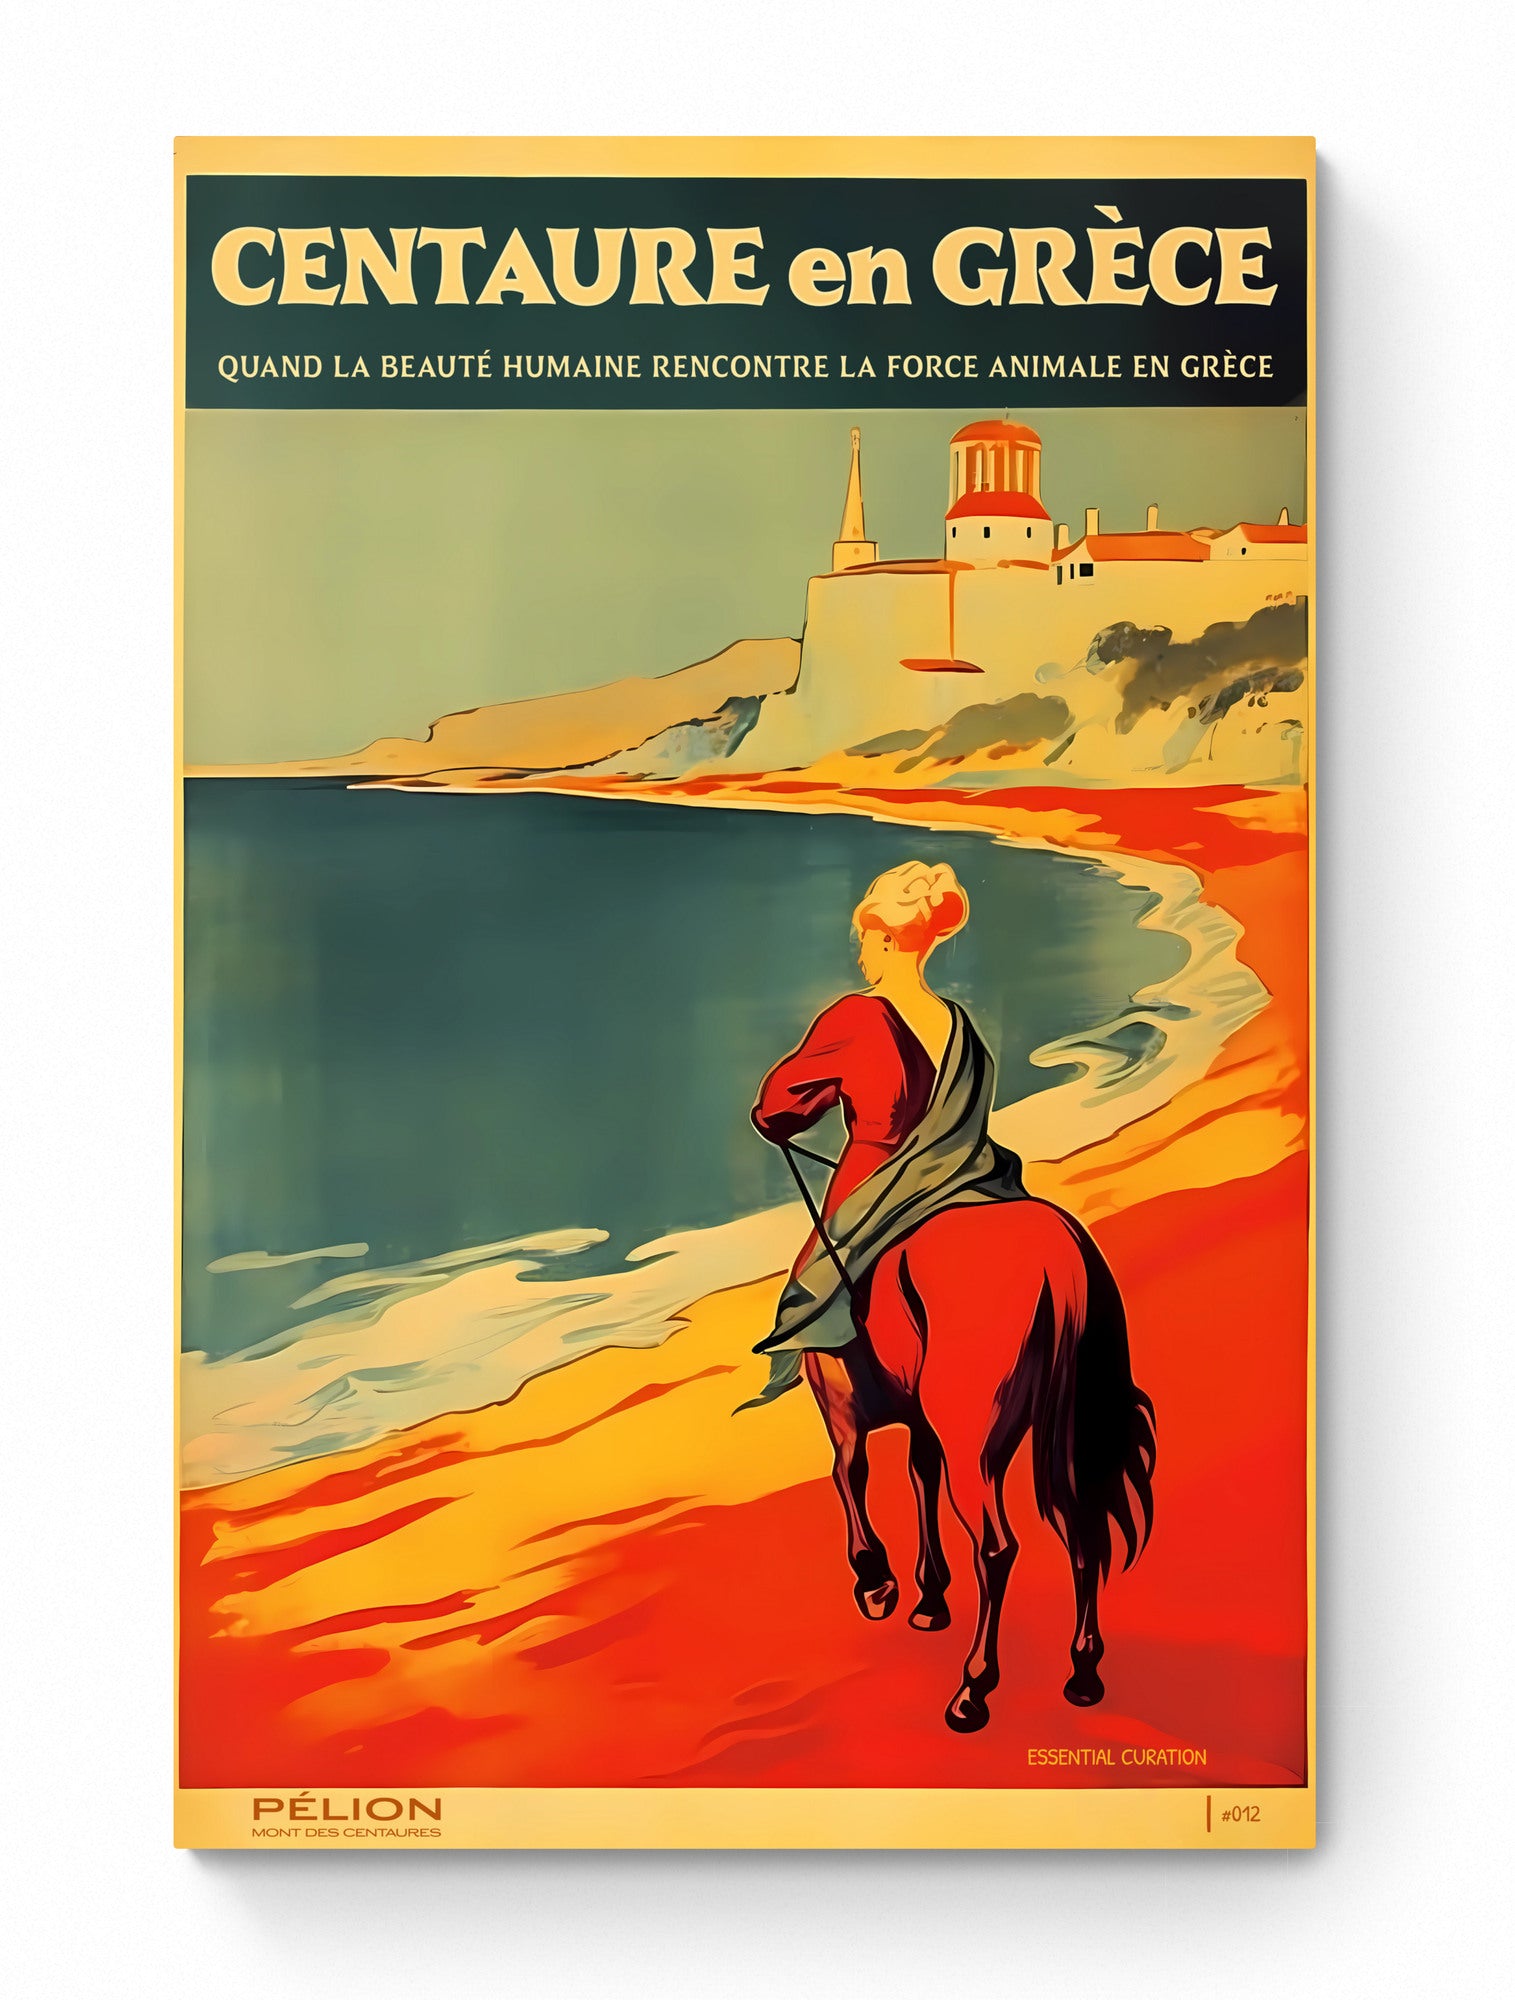 Color Retro Poster Wall Art from Greece by George Tatakis | Centaur in Pelion by the sea - poster